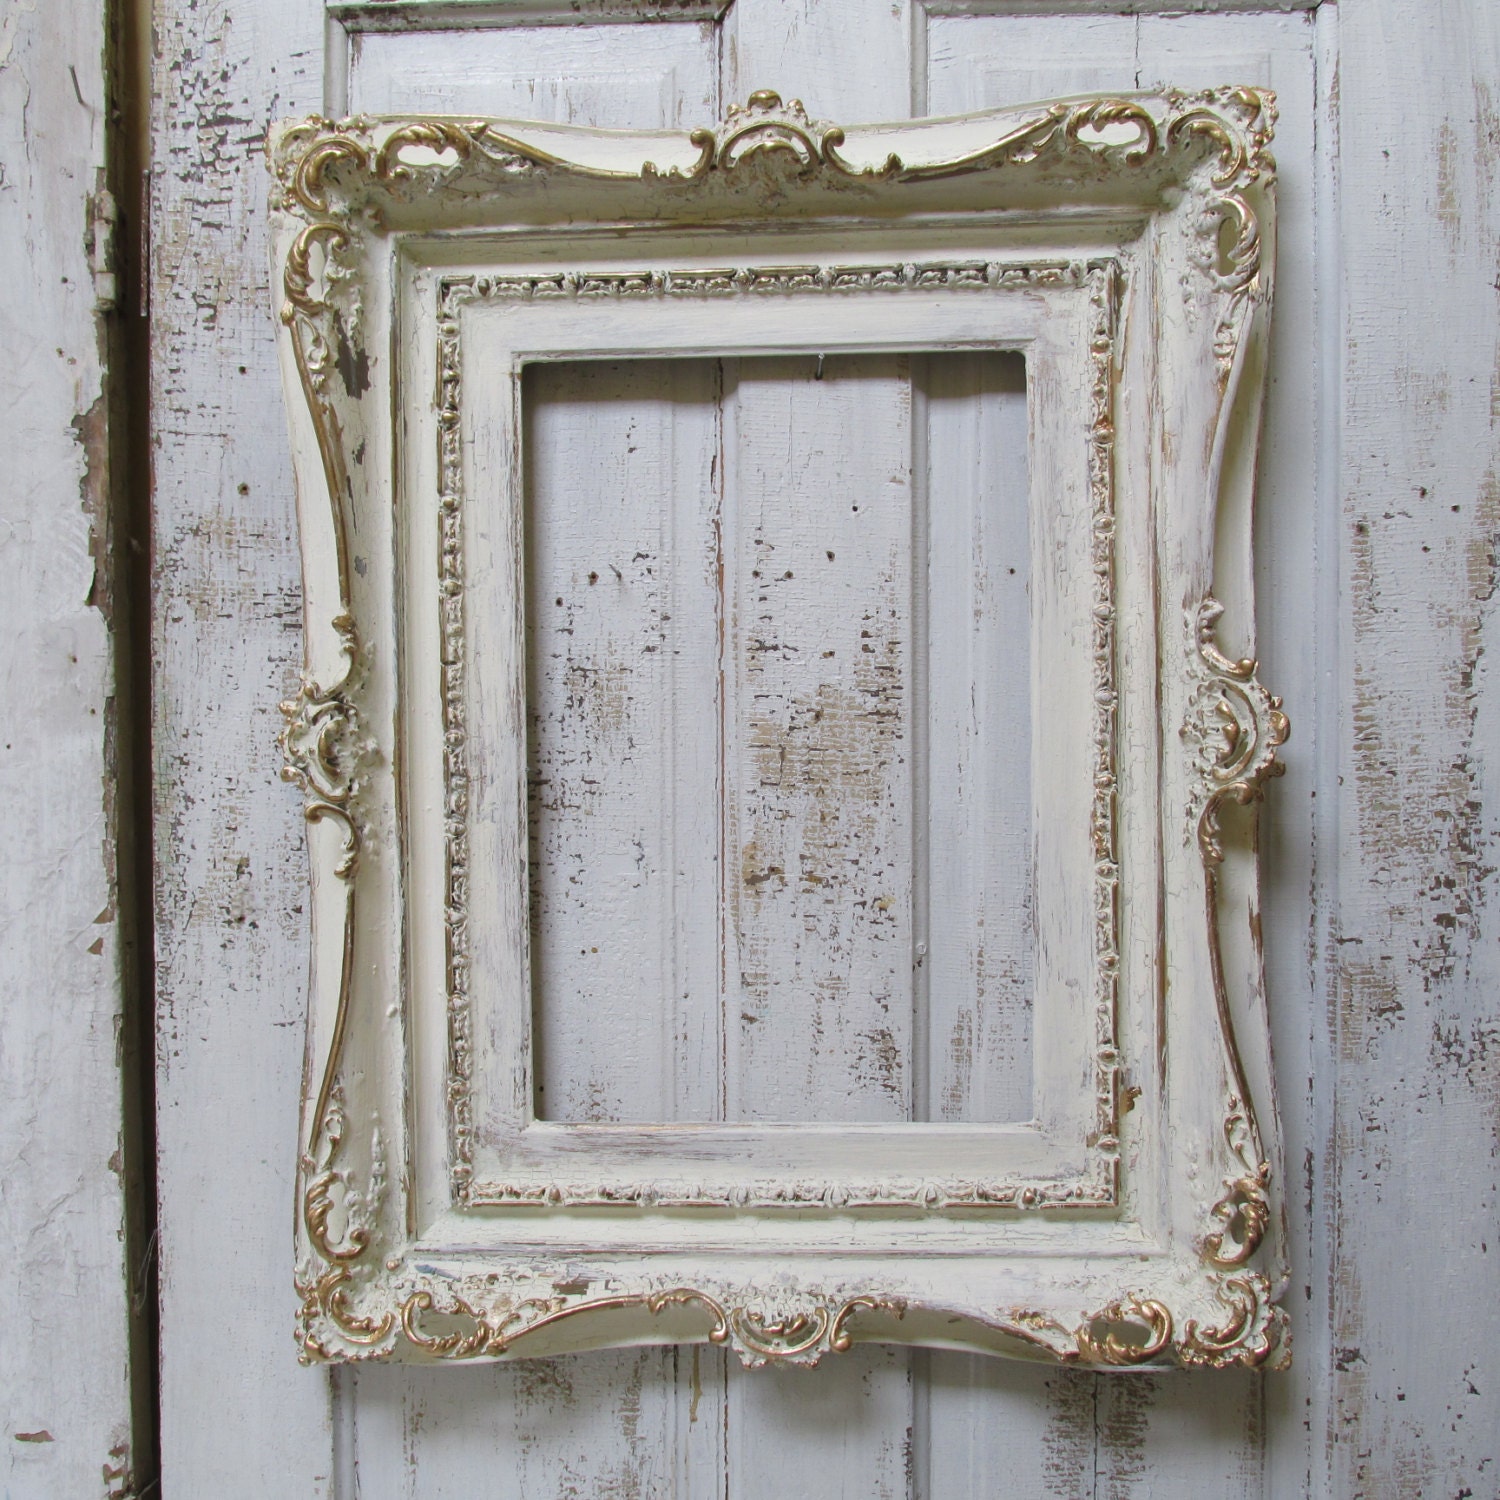 Large ivory ornate frame hand painted wood distressed shabby